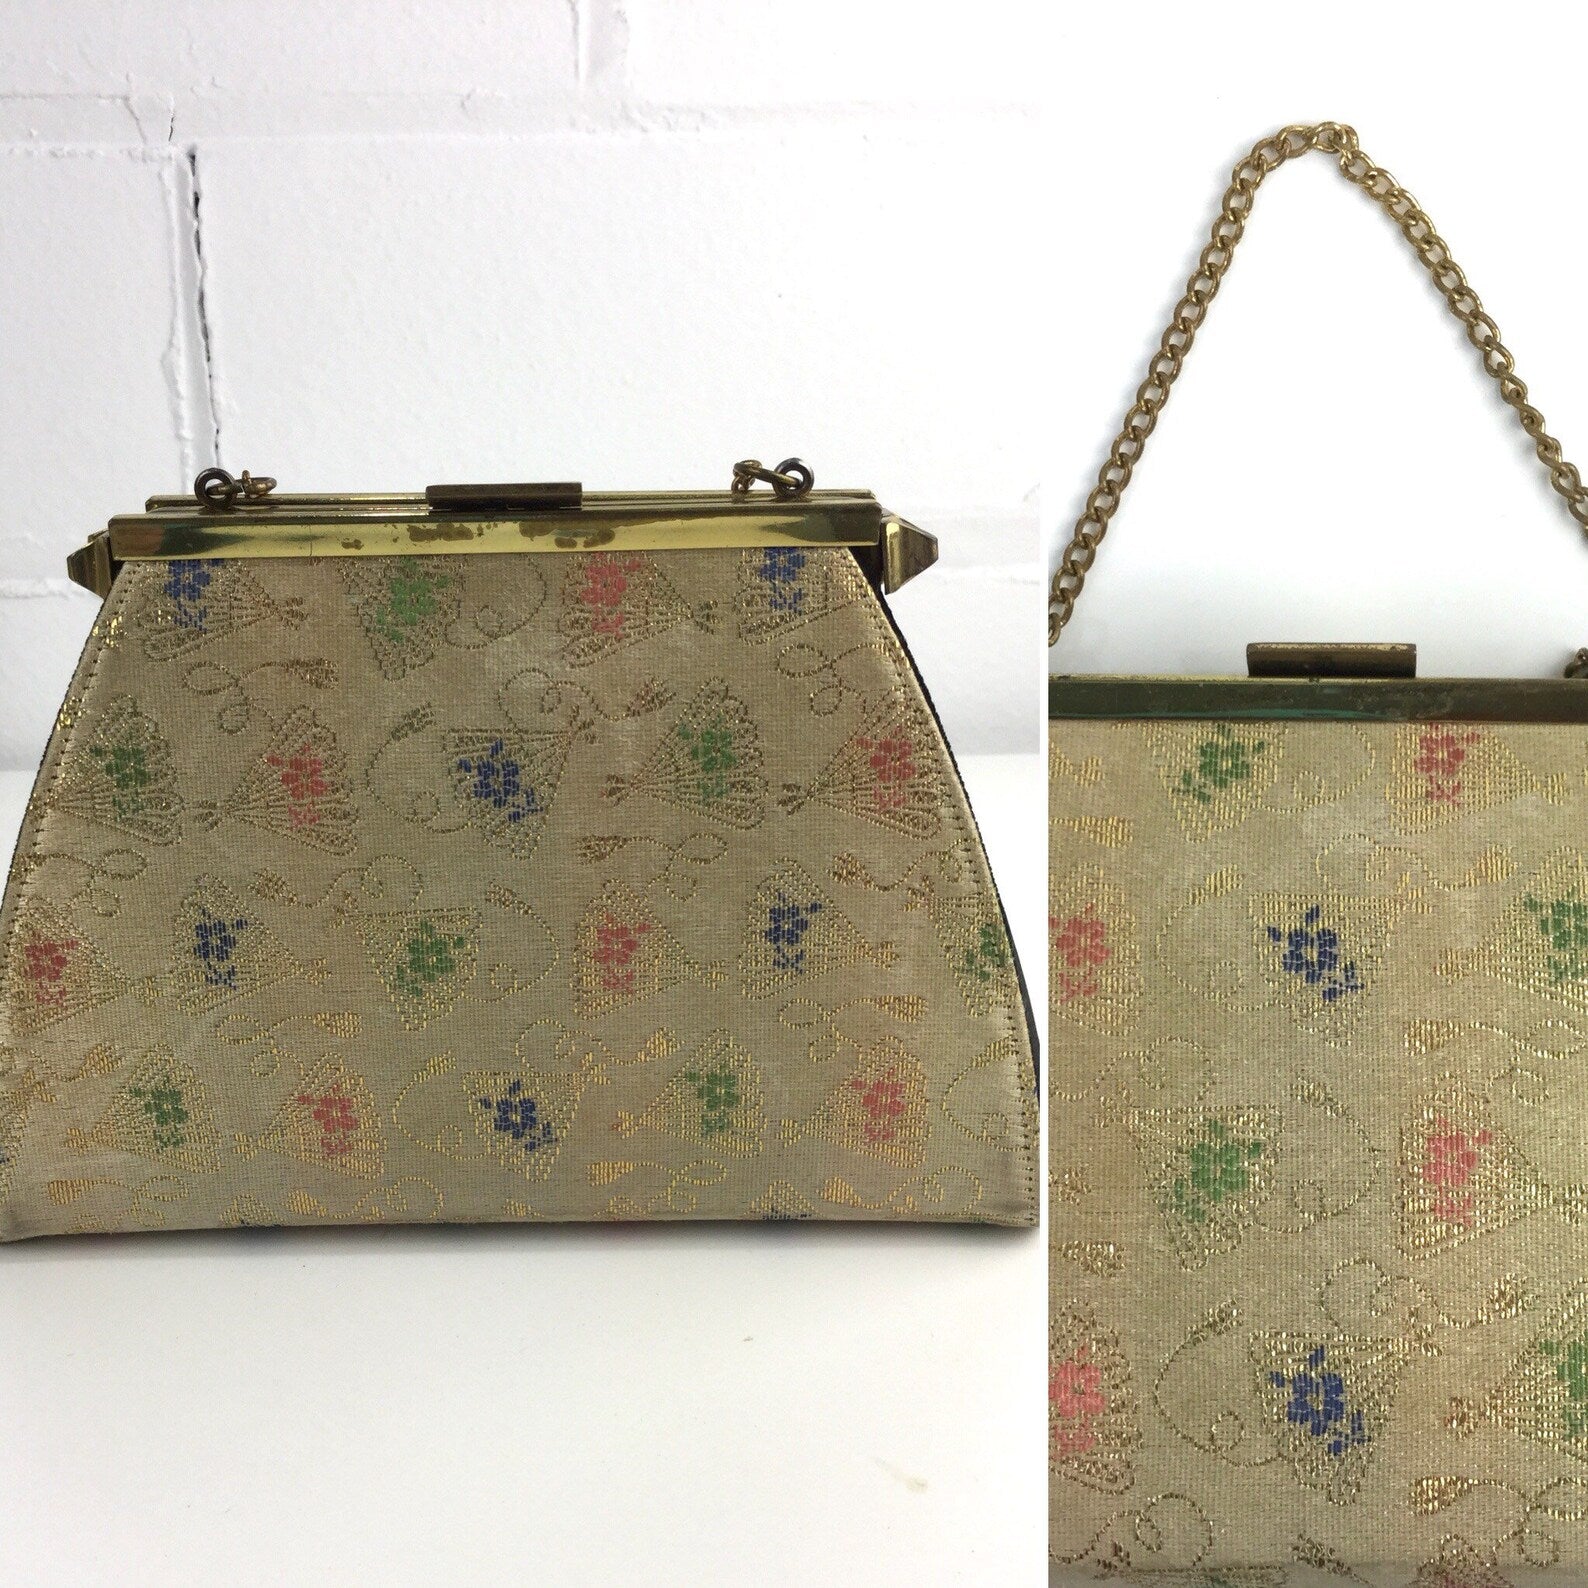 Vintage 1950s 1960s Japan Italy evening clutch purse